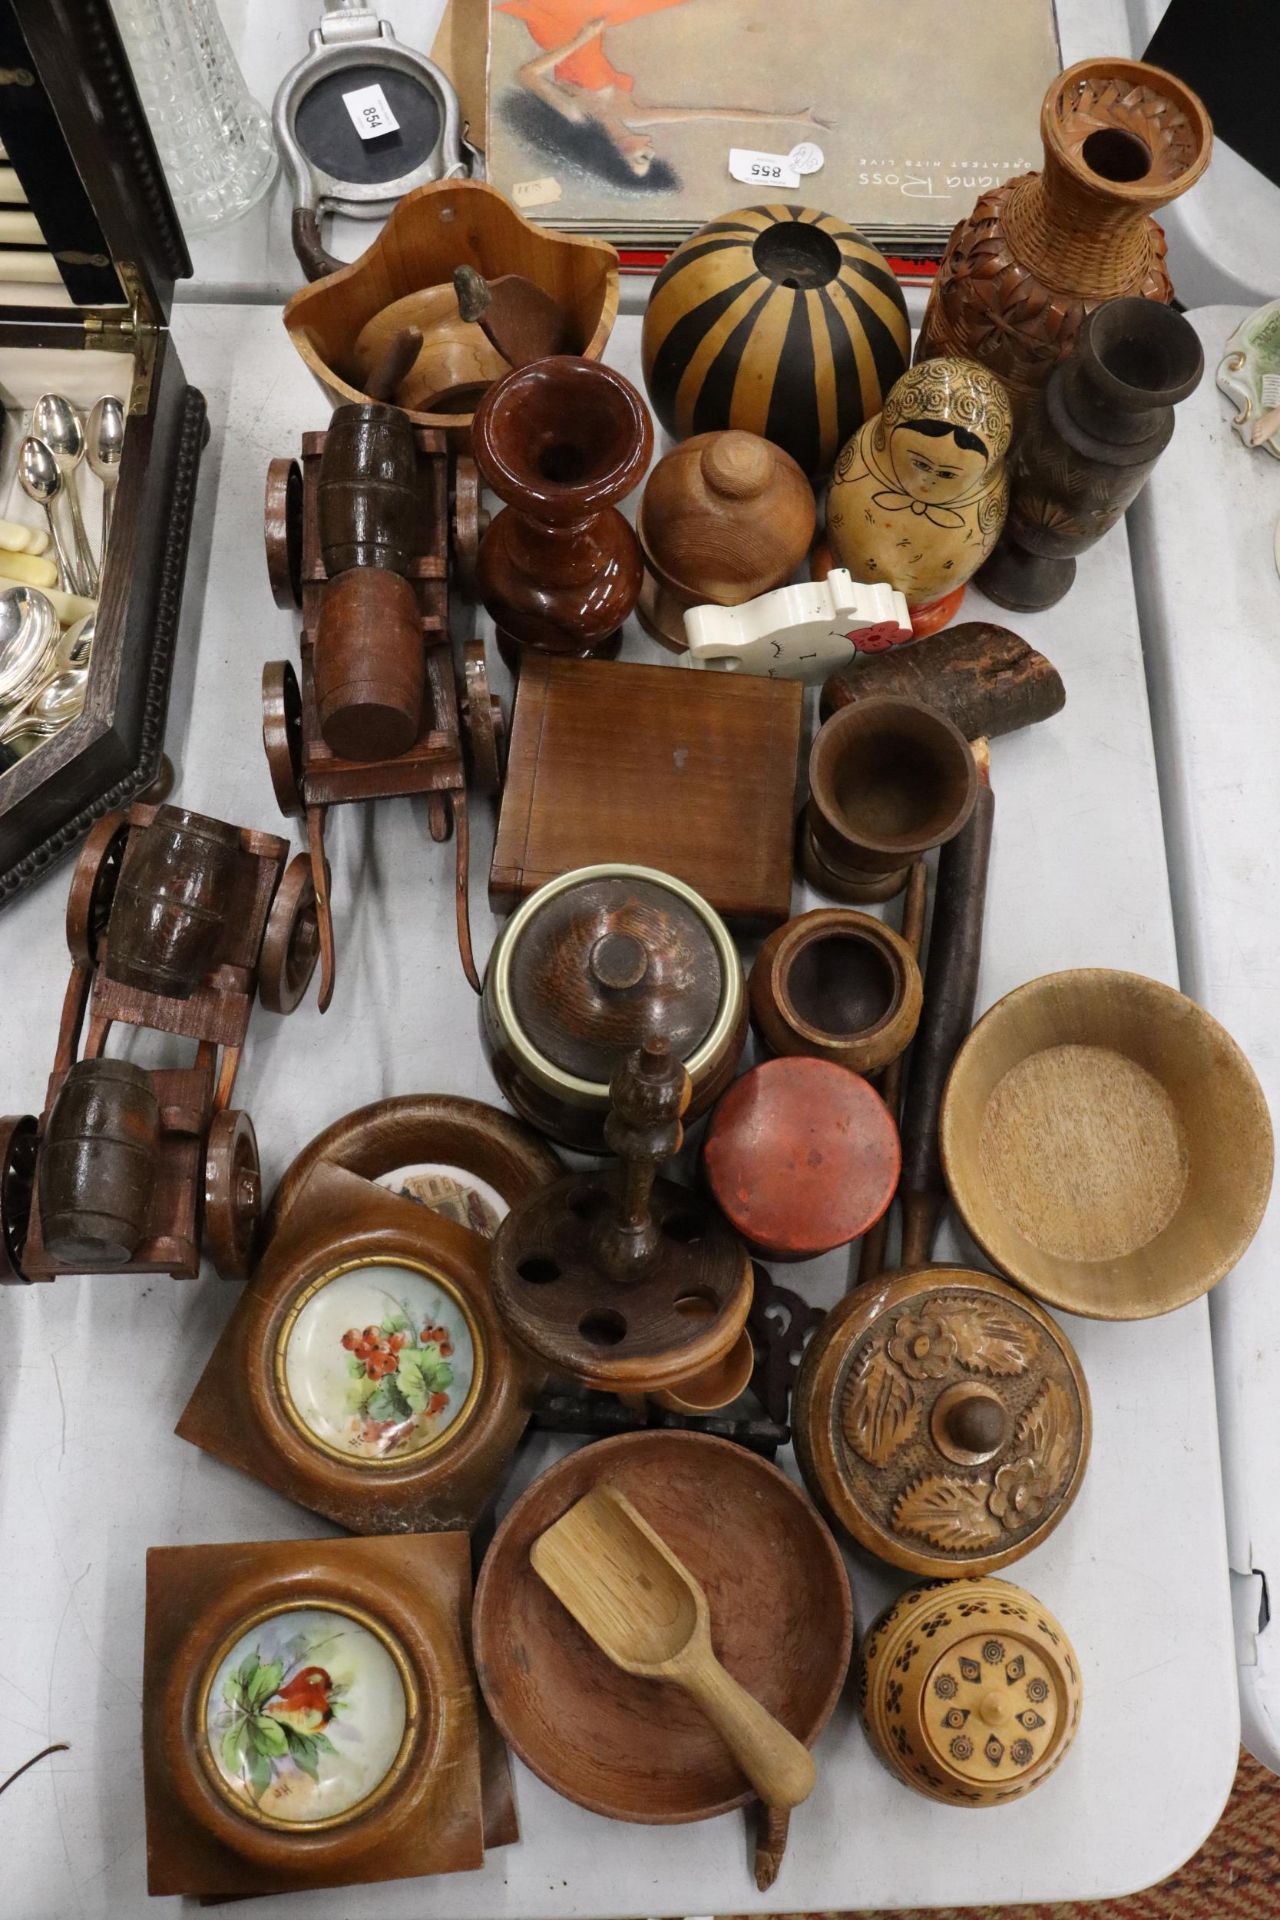 A LARGE QUANTITY OF TREEN ITEMS TO INCLUUDE BOWLS, TRINKET BOXES, FRAMED HANDPAINTED TILES, - Image 9 of 11